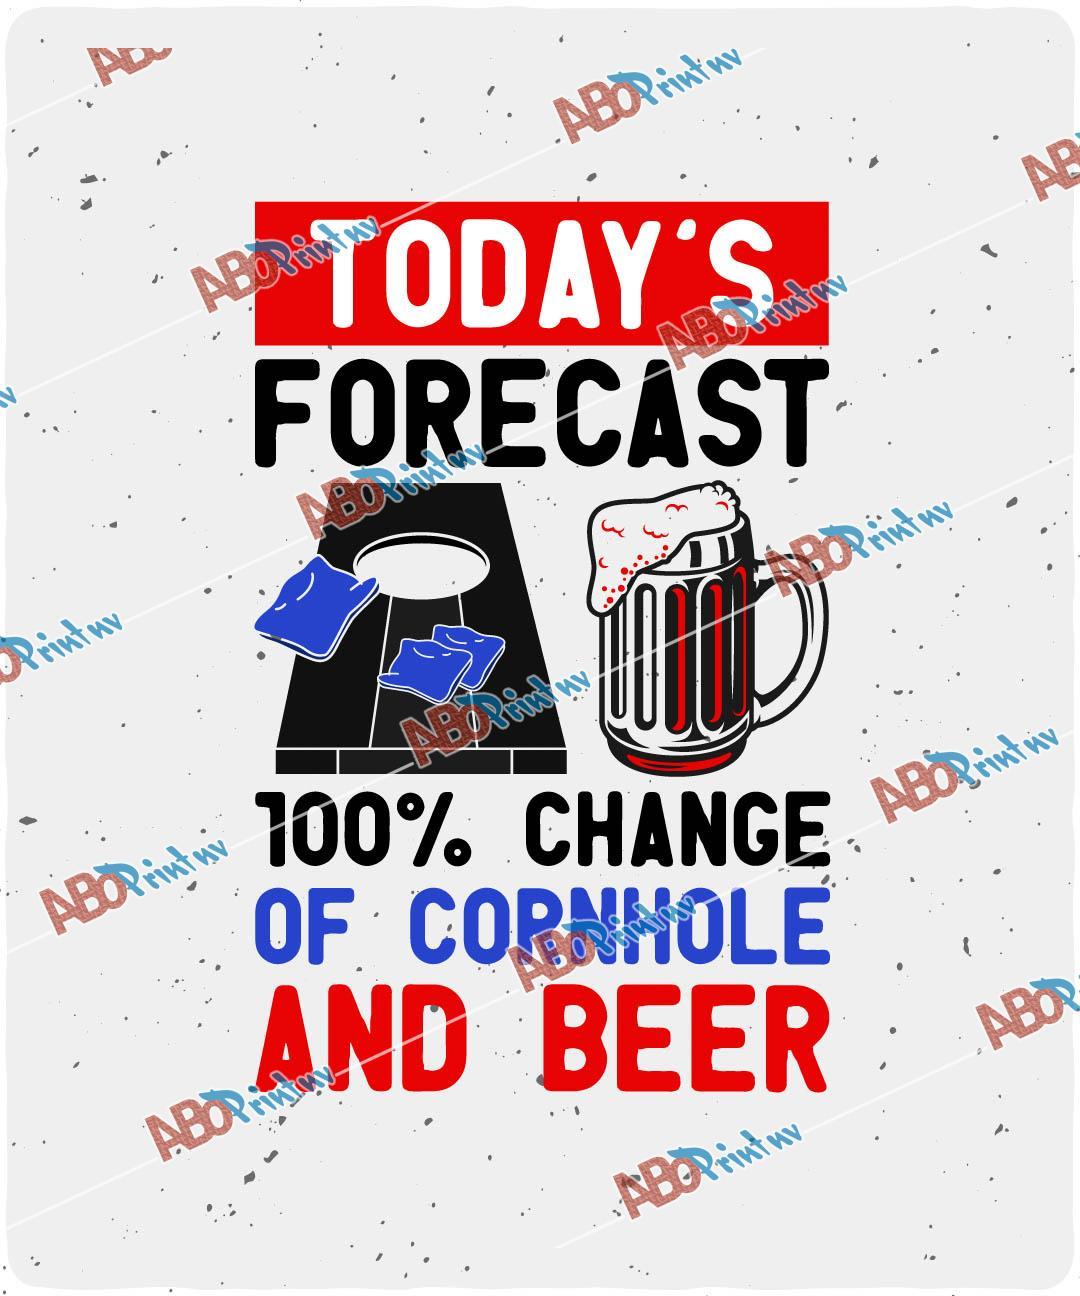 Today s Forecast 100% Change Of Cornhole and Beer.jpg